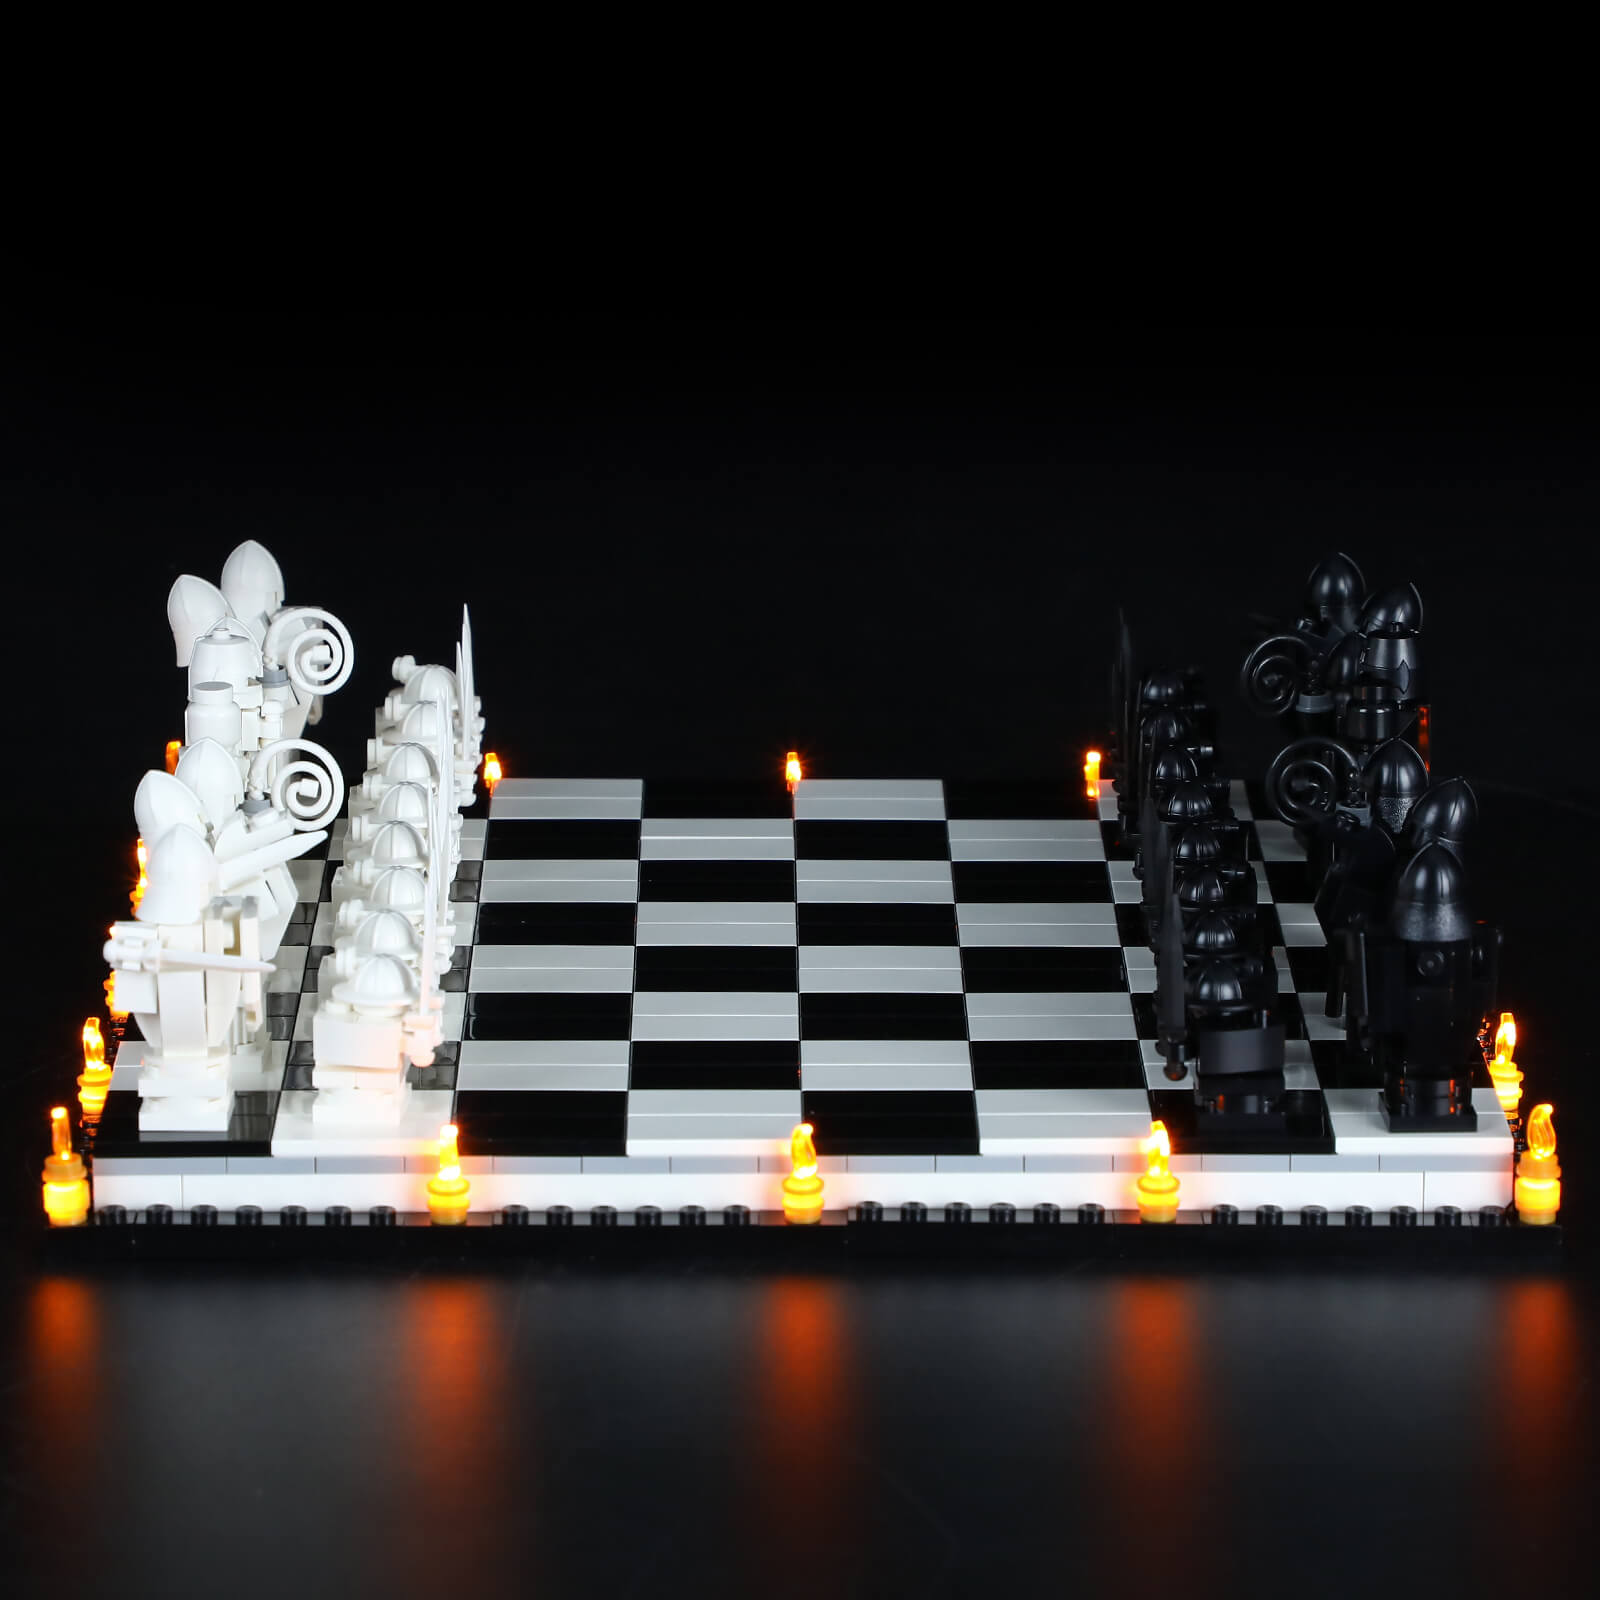 light up harry potter wizards chess lego